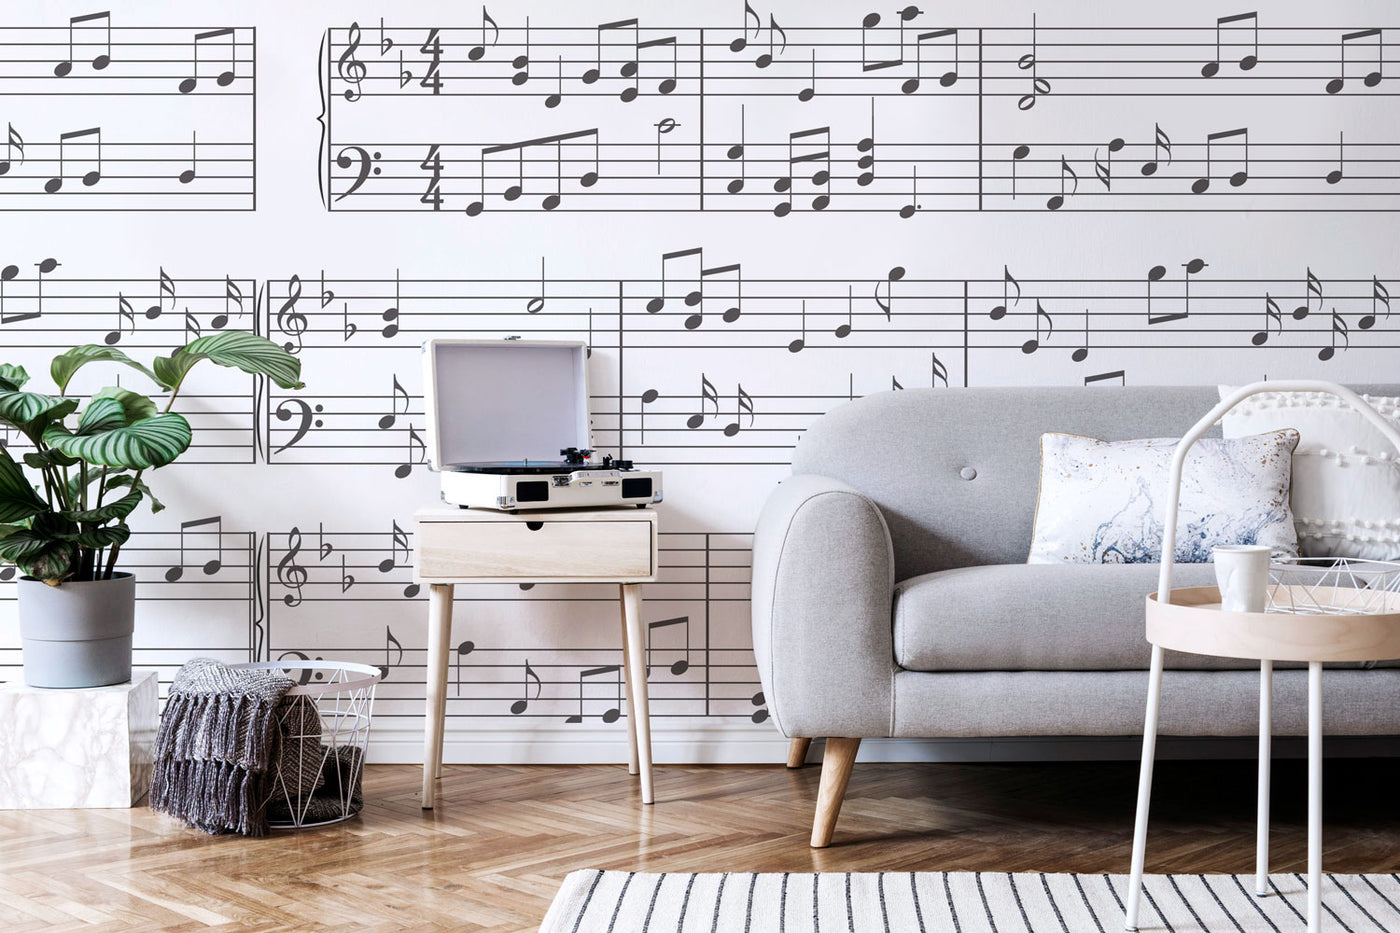 Arts and Music Wall Murals - Eazywallz